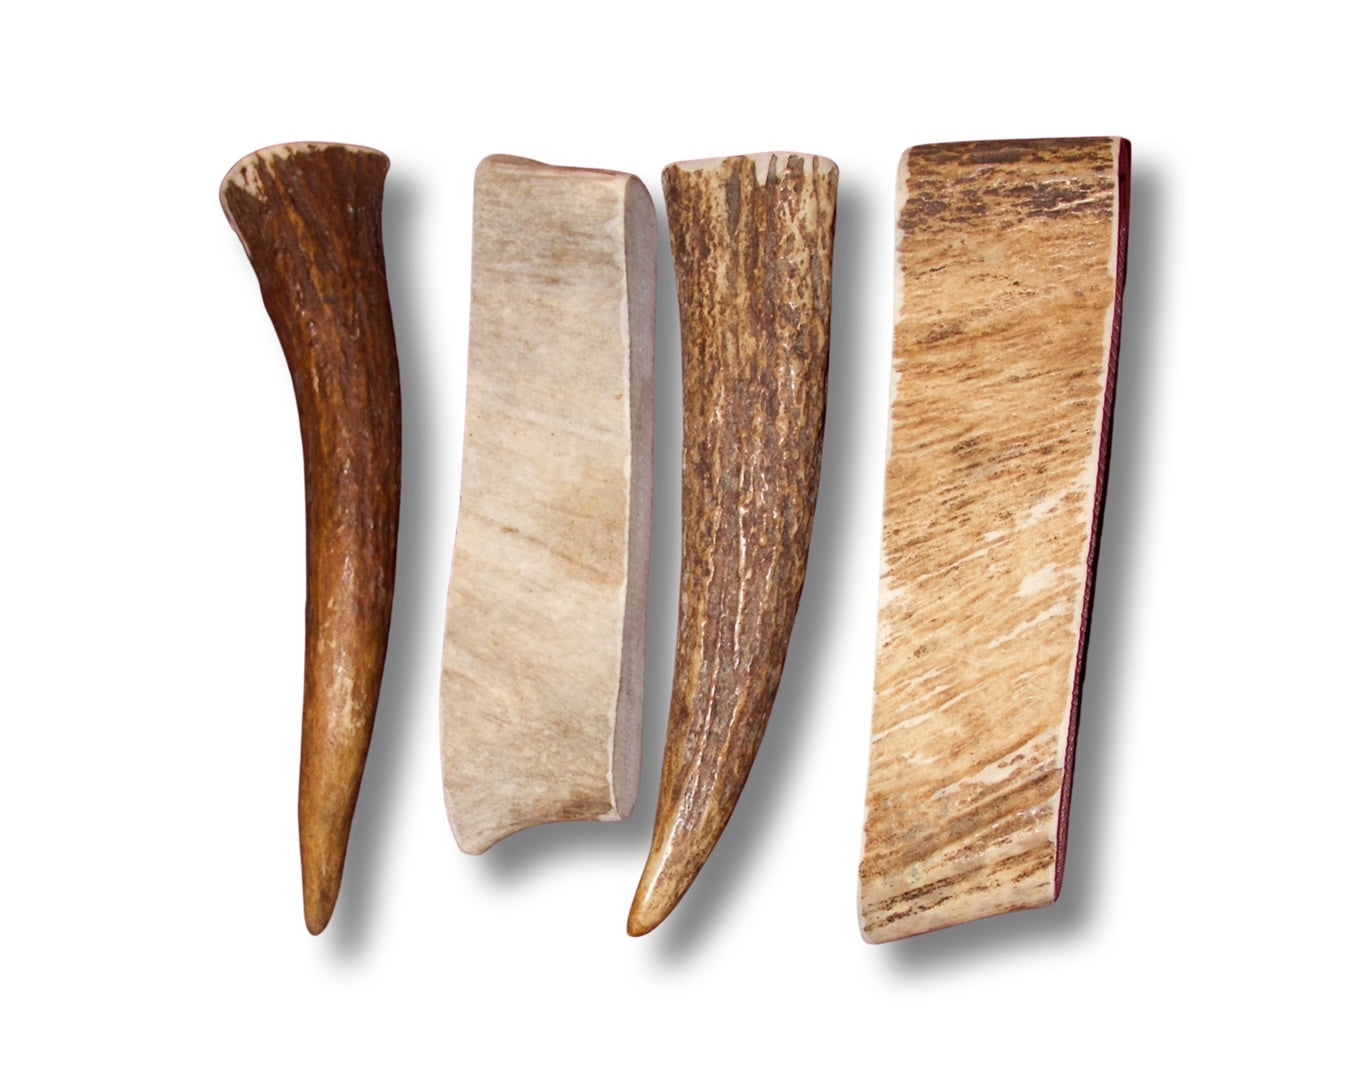 Large Moose Antler Paddle For Dogs Up To 50 Pounds. Lighter Chewers